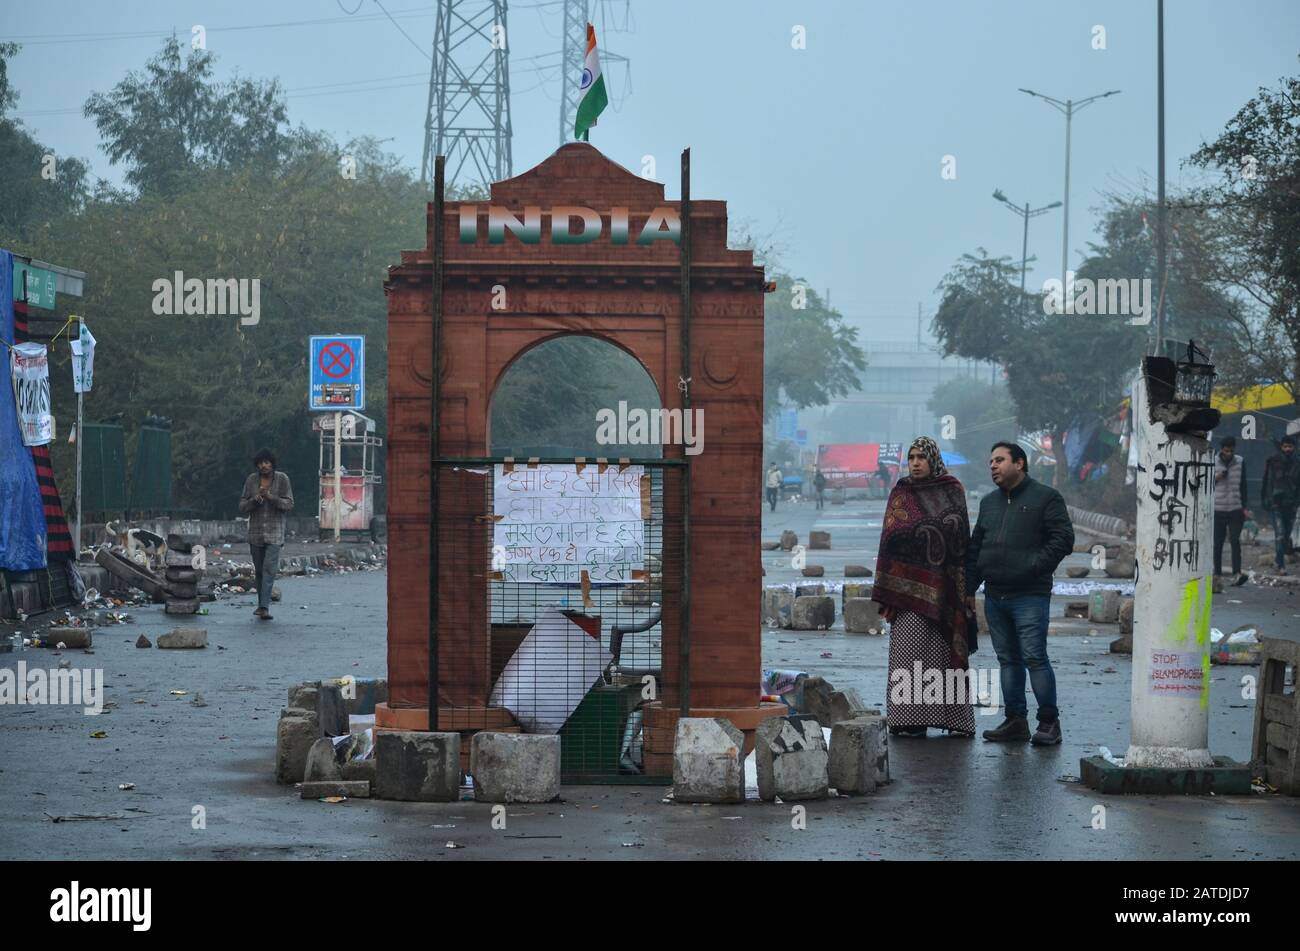 Women Protest against CAA & NRC, Shaheen Bagh, New Delhi, India- January 17, 2020: The replica of India gate at the protest venue, Shaheen Bagh, New Delhi. Stock Photo